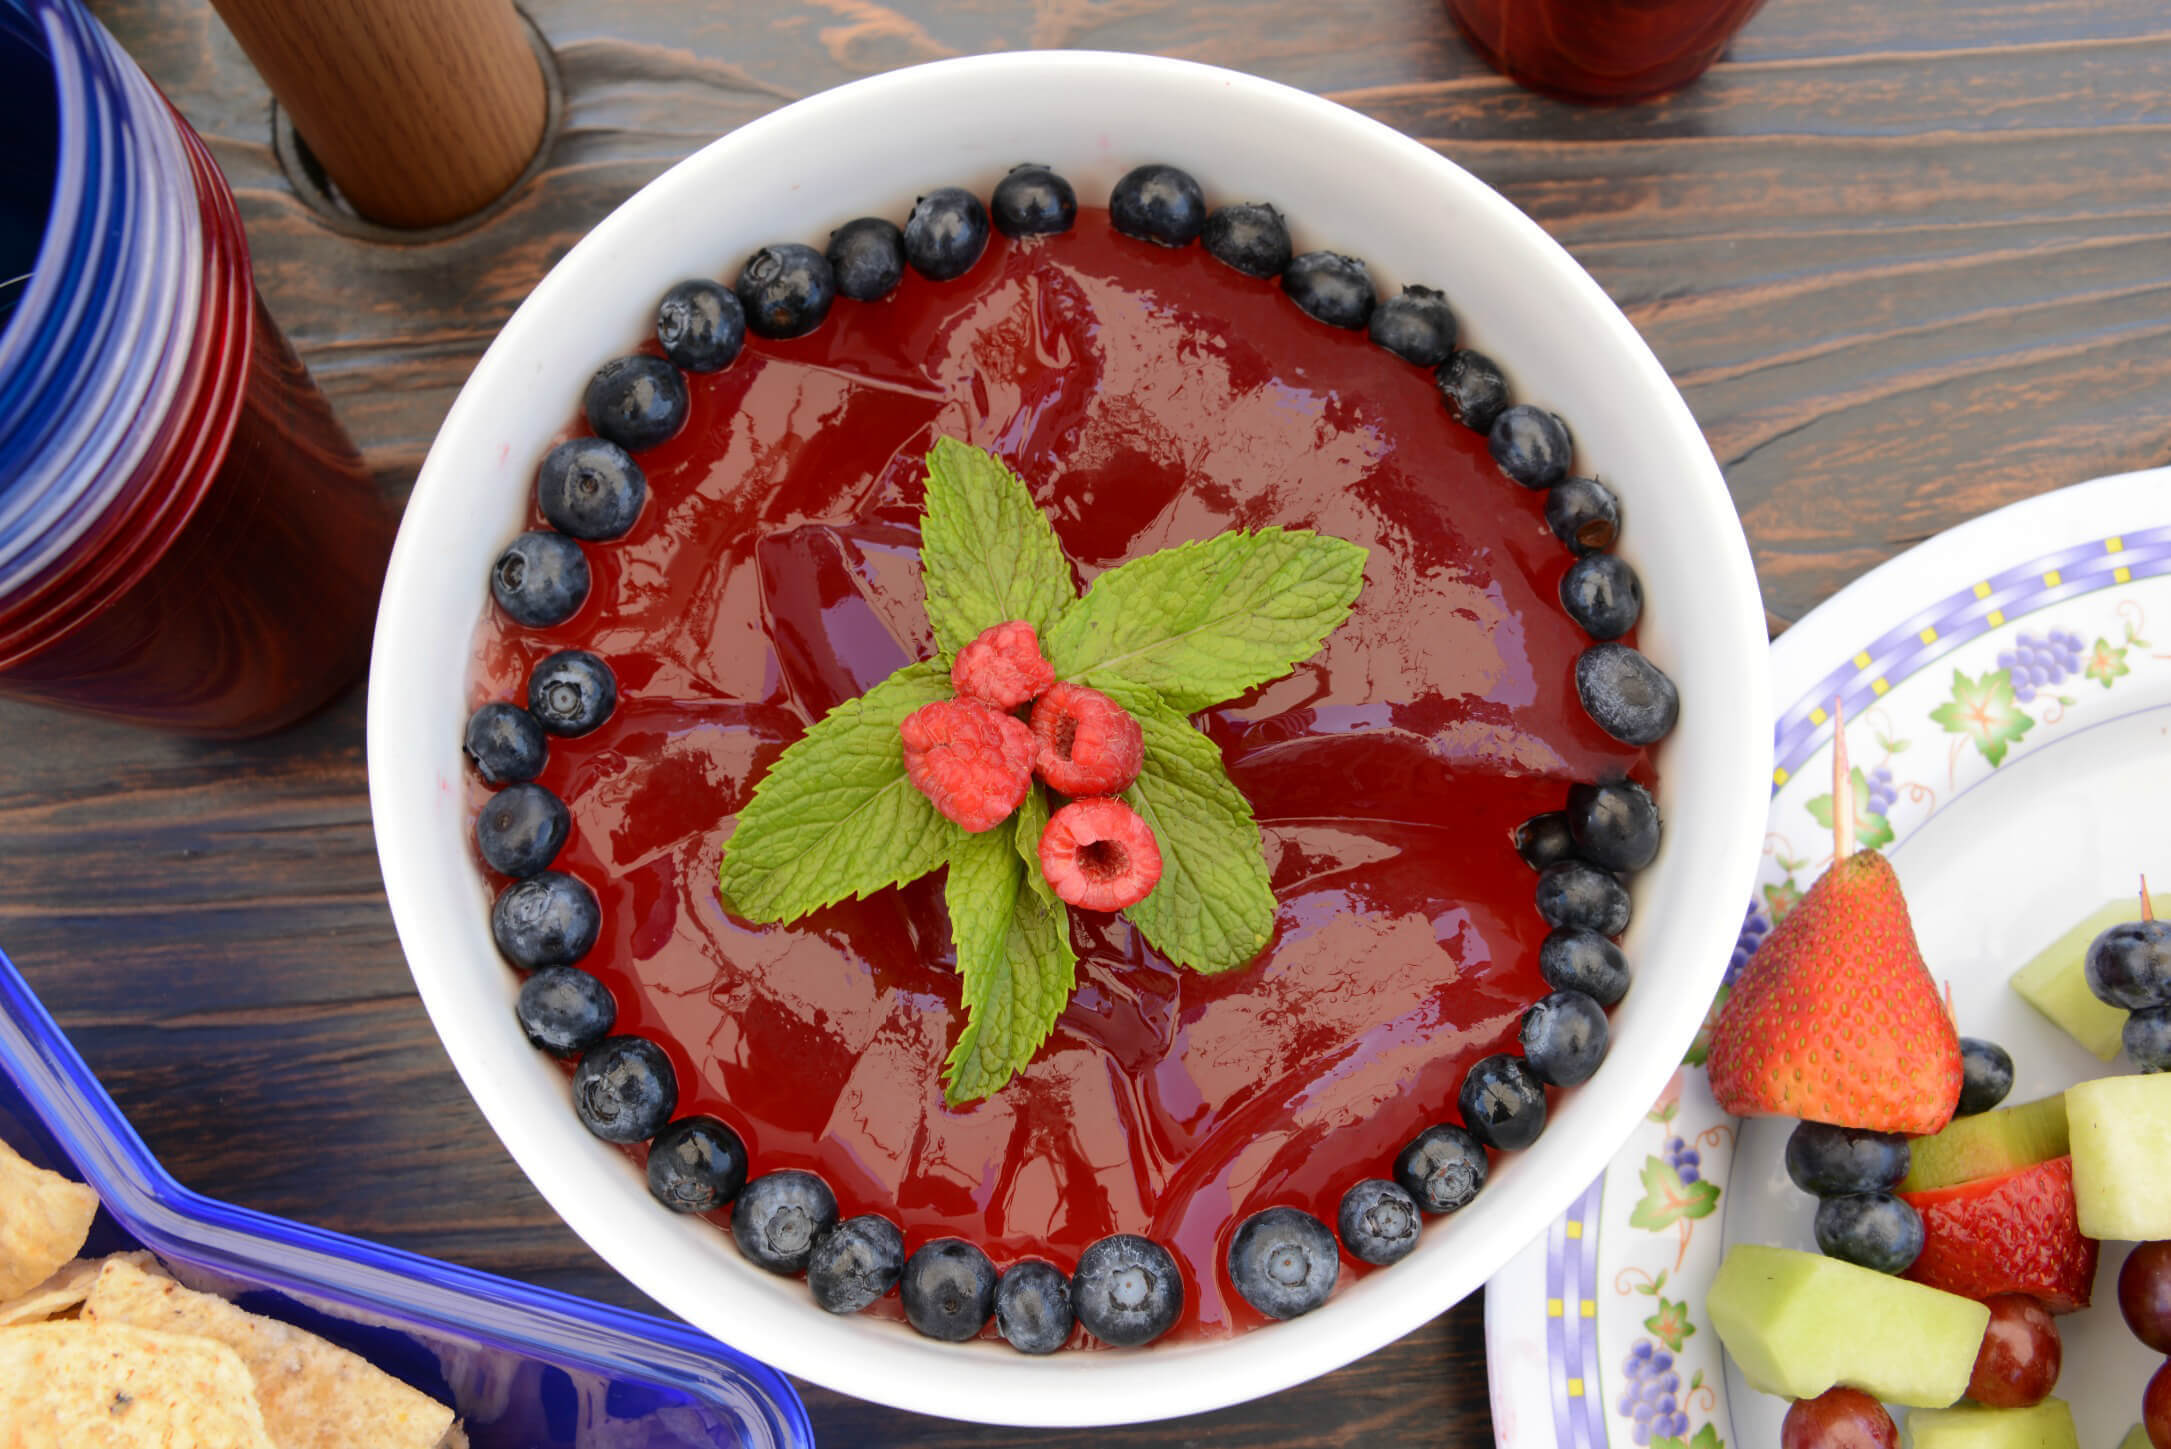 4th of July Desserts - Berry Not Jell-O